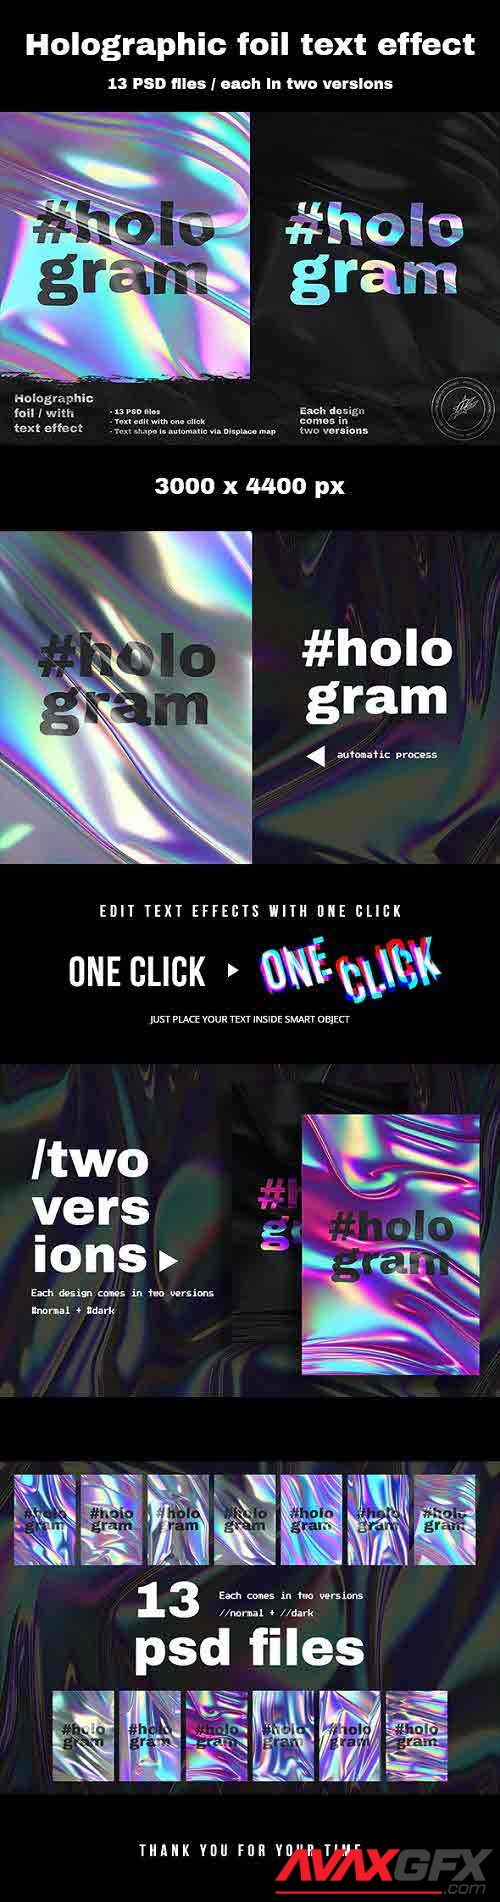 Holographic Foil with Text Effect Vol 2 - 44226804